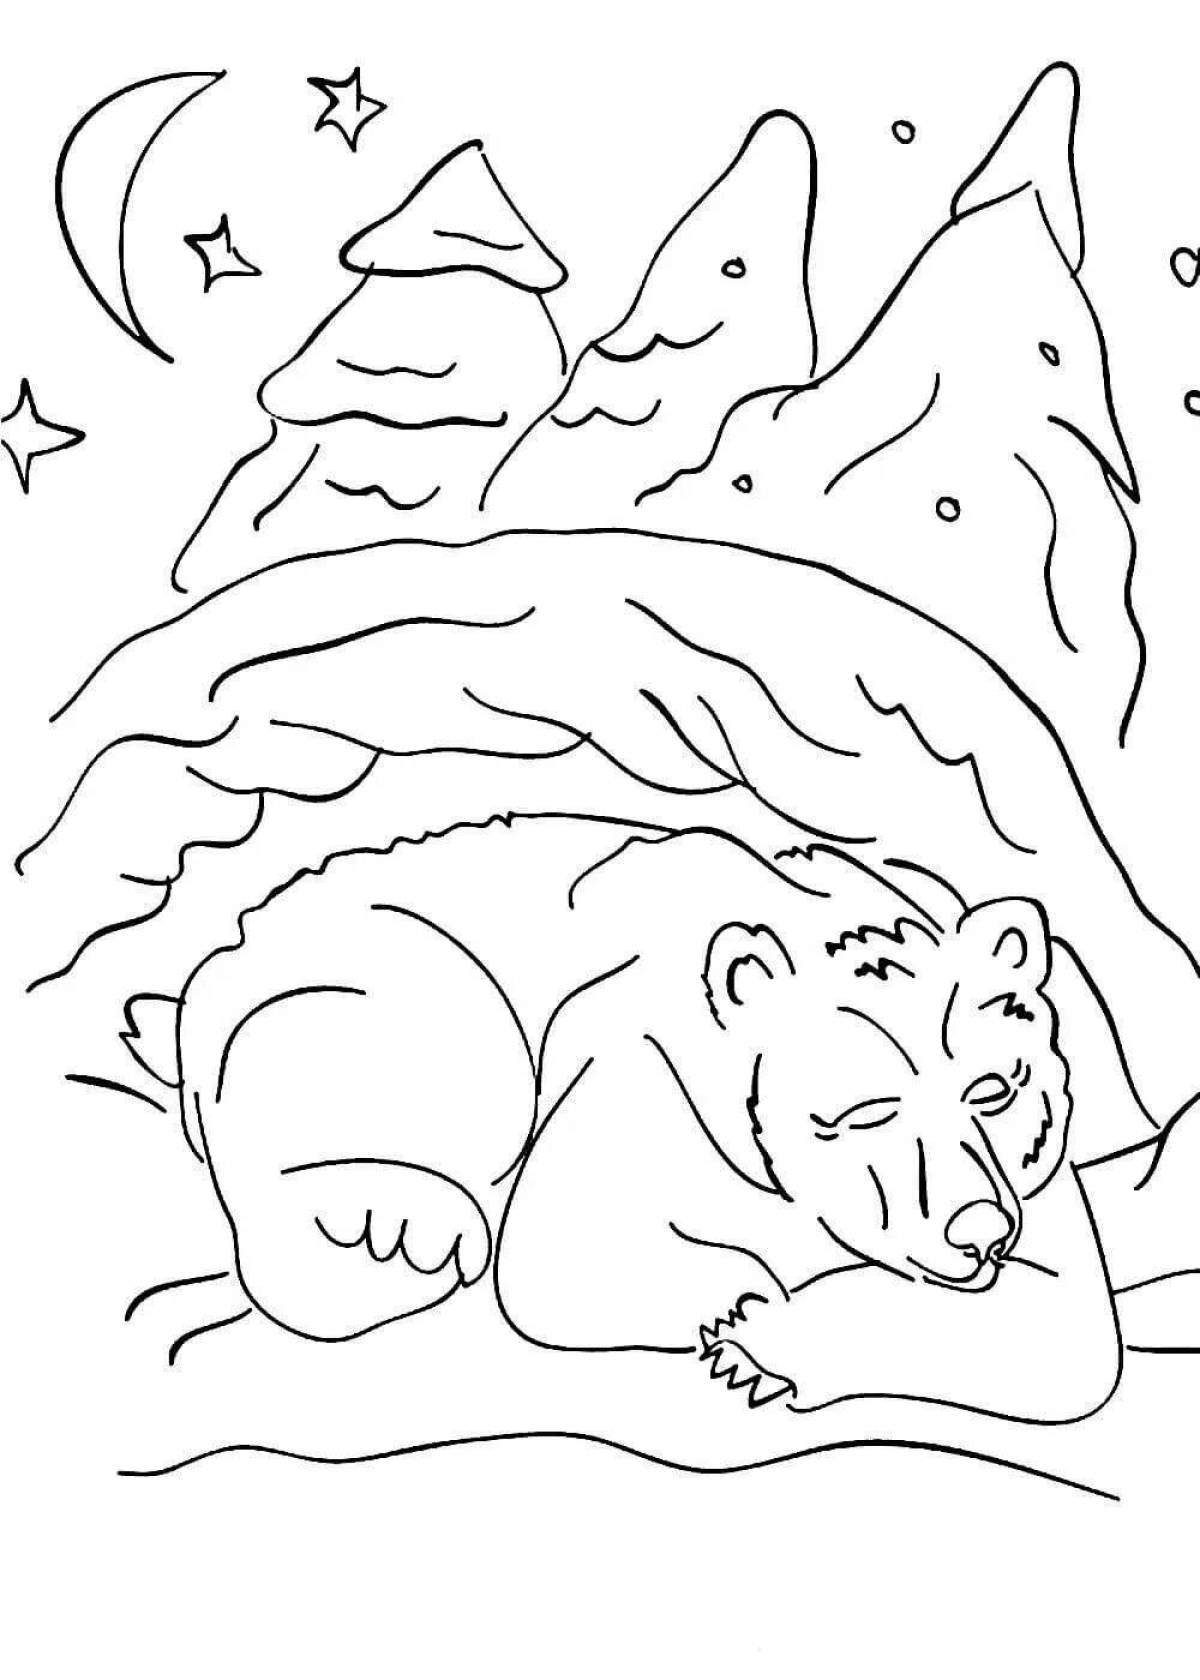 Luminous coloring pages of wild animals in winter